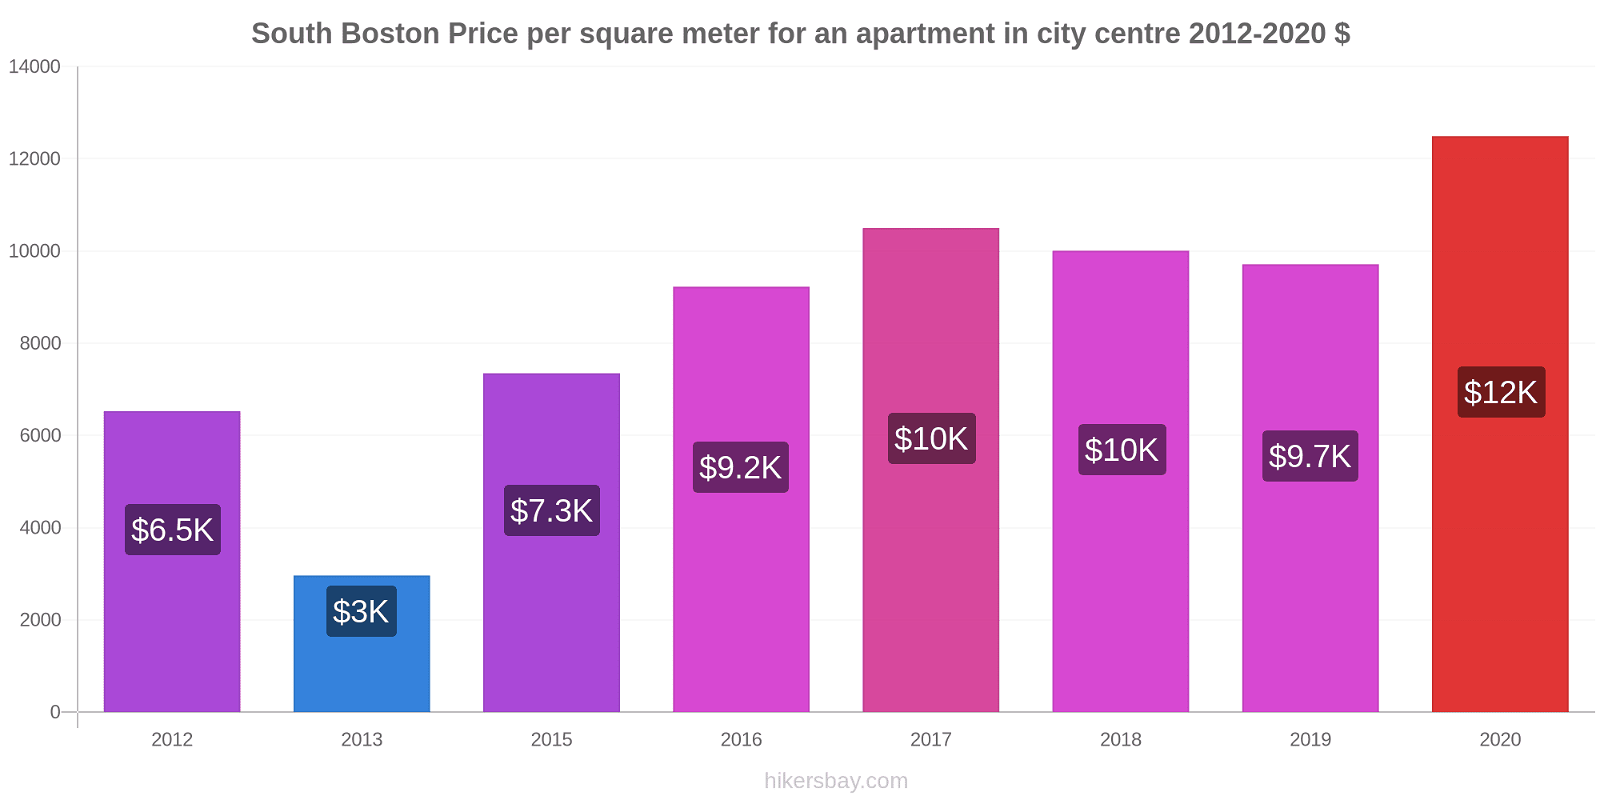 South Boston price changes Price per square meter for an apartment in city centre hikersbay.com